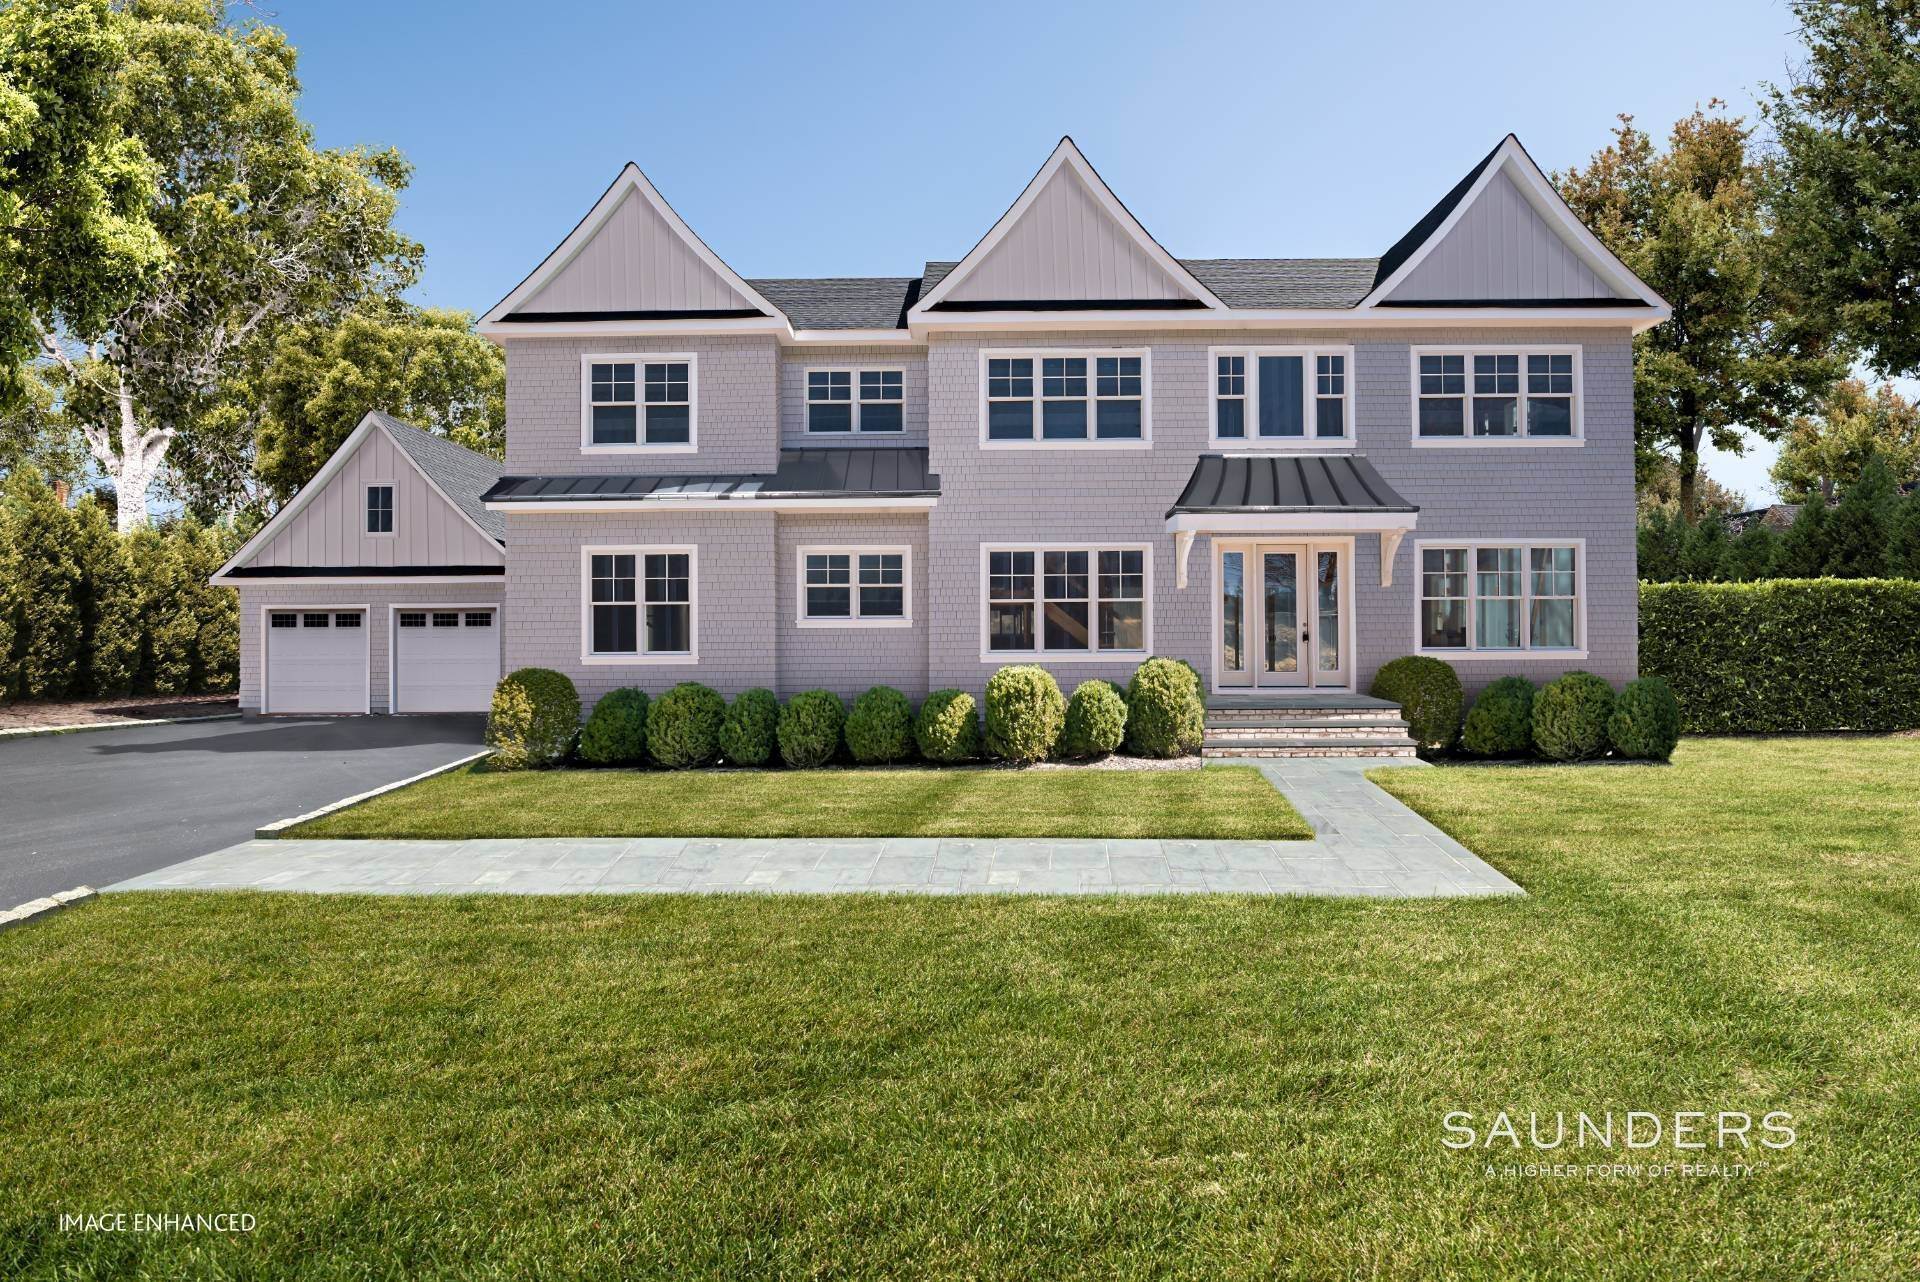 1. Single Family Homes for Sale at New Construction With Saltwater Pool In Desirable Quogue Village 46 Jessup Avenue, Quogue, NY 11959